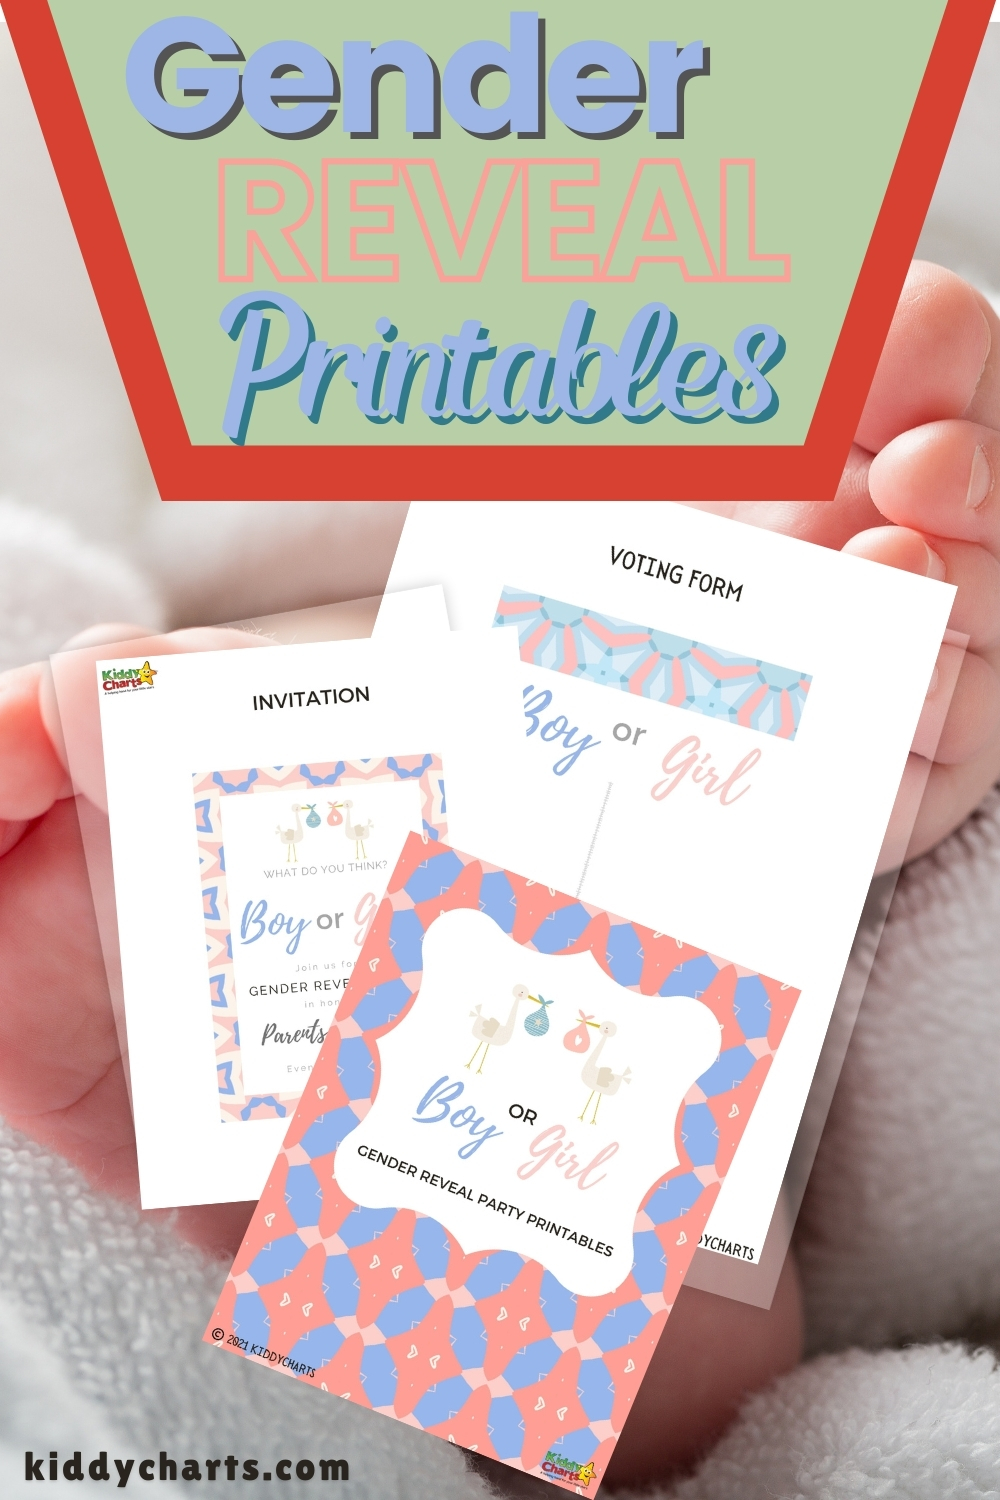 Gender reveals: Party printables and invitation